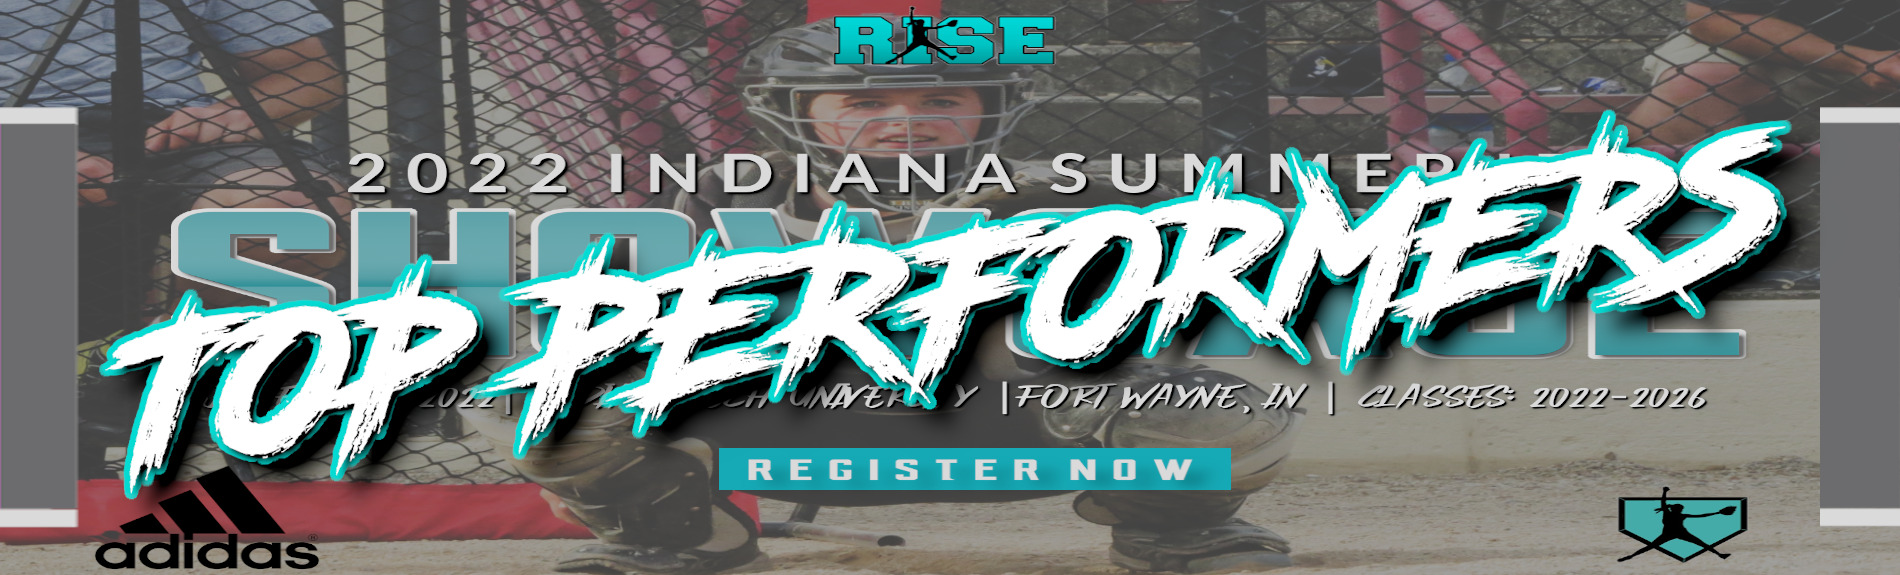 Indiana Summer ID Showcase “TOP PERFORMERS”